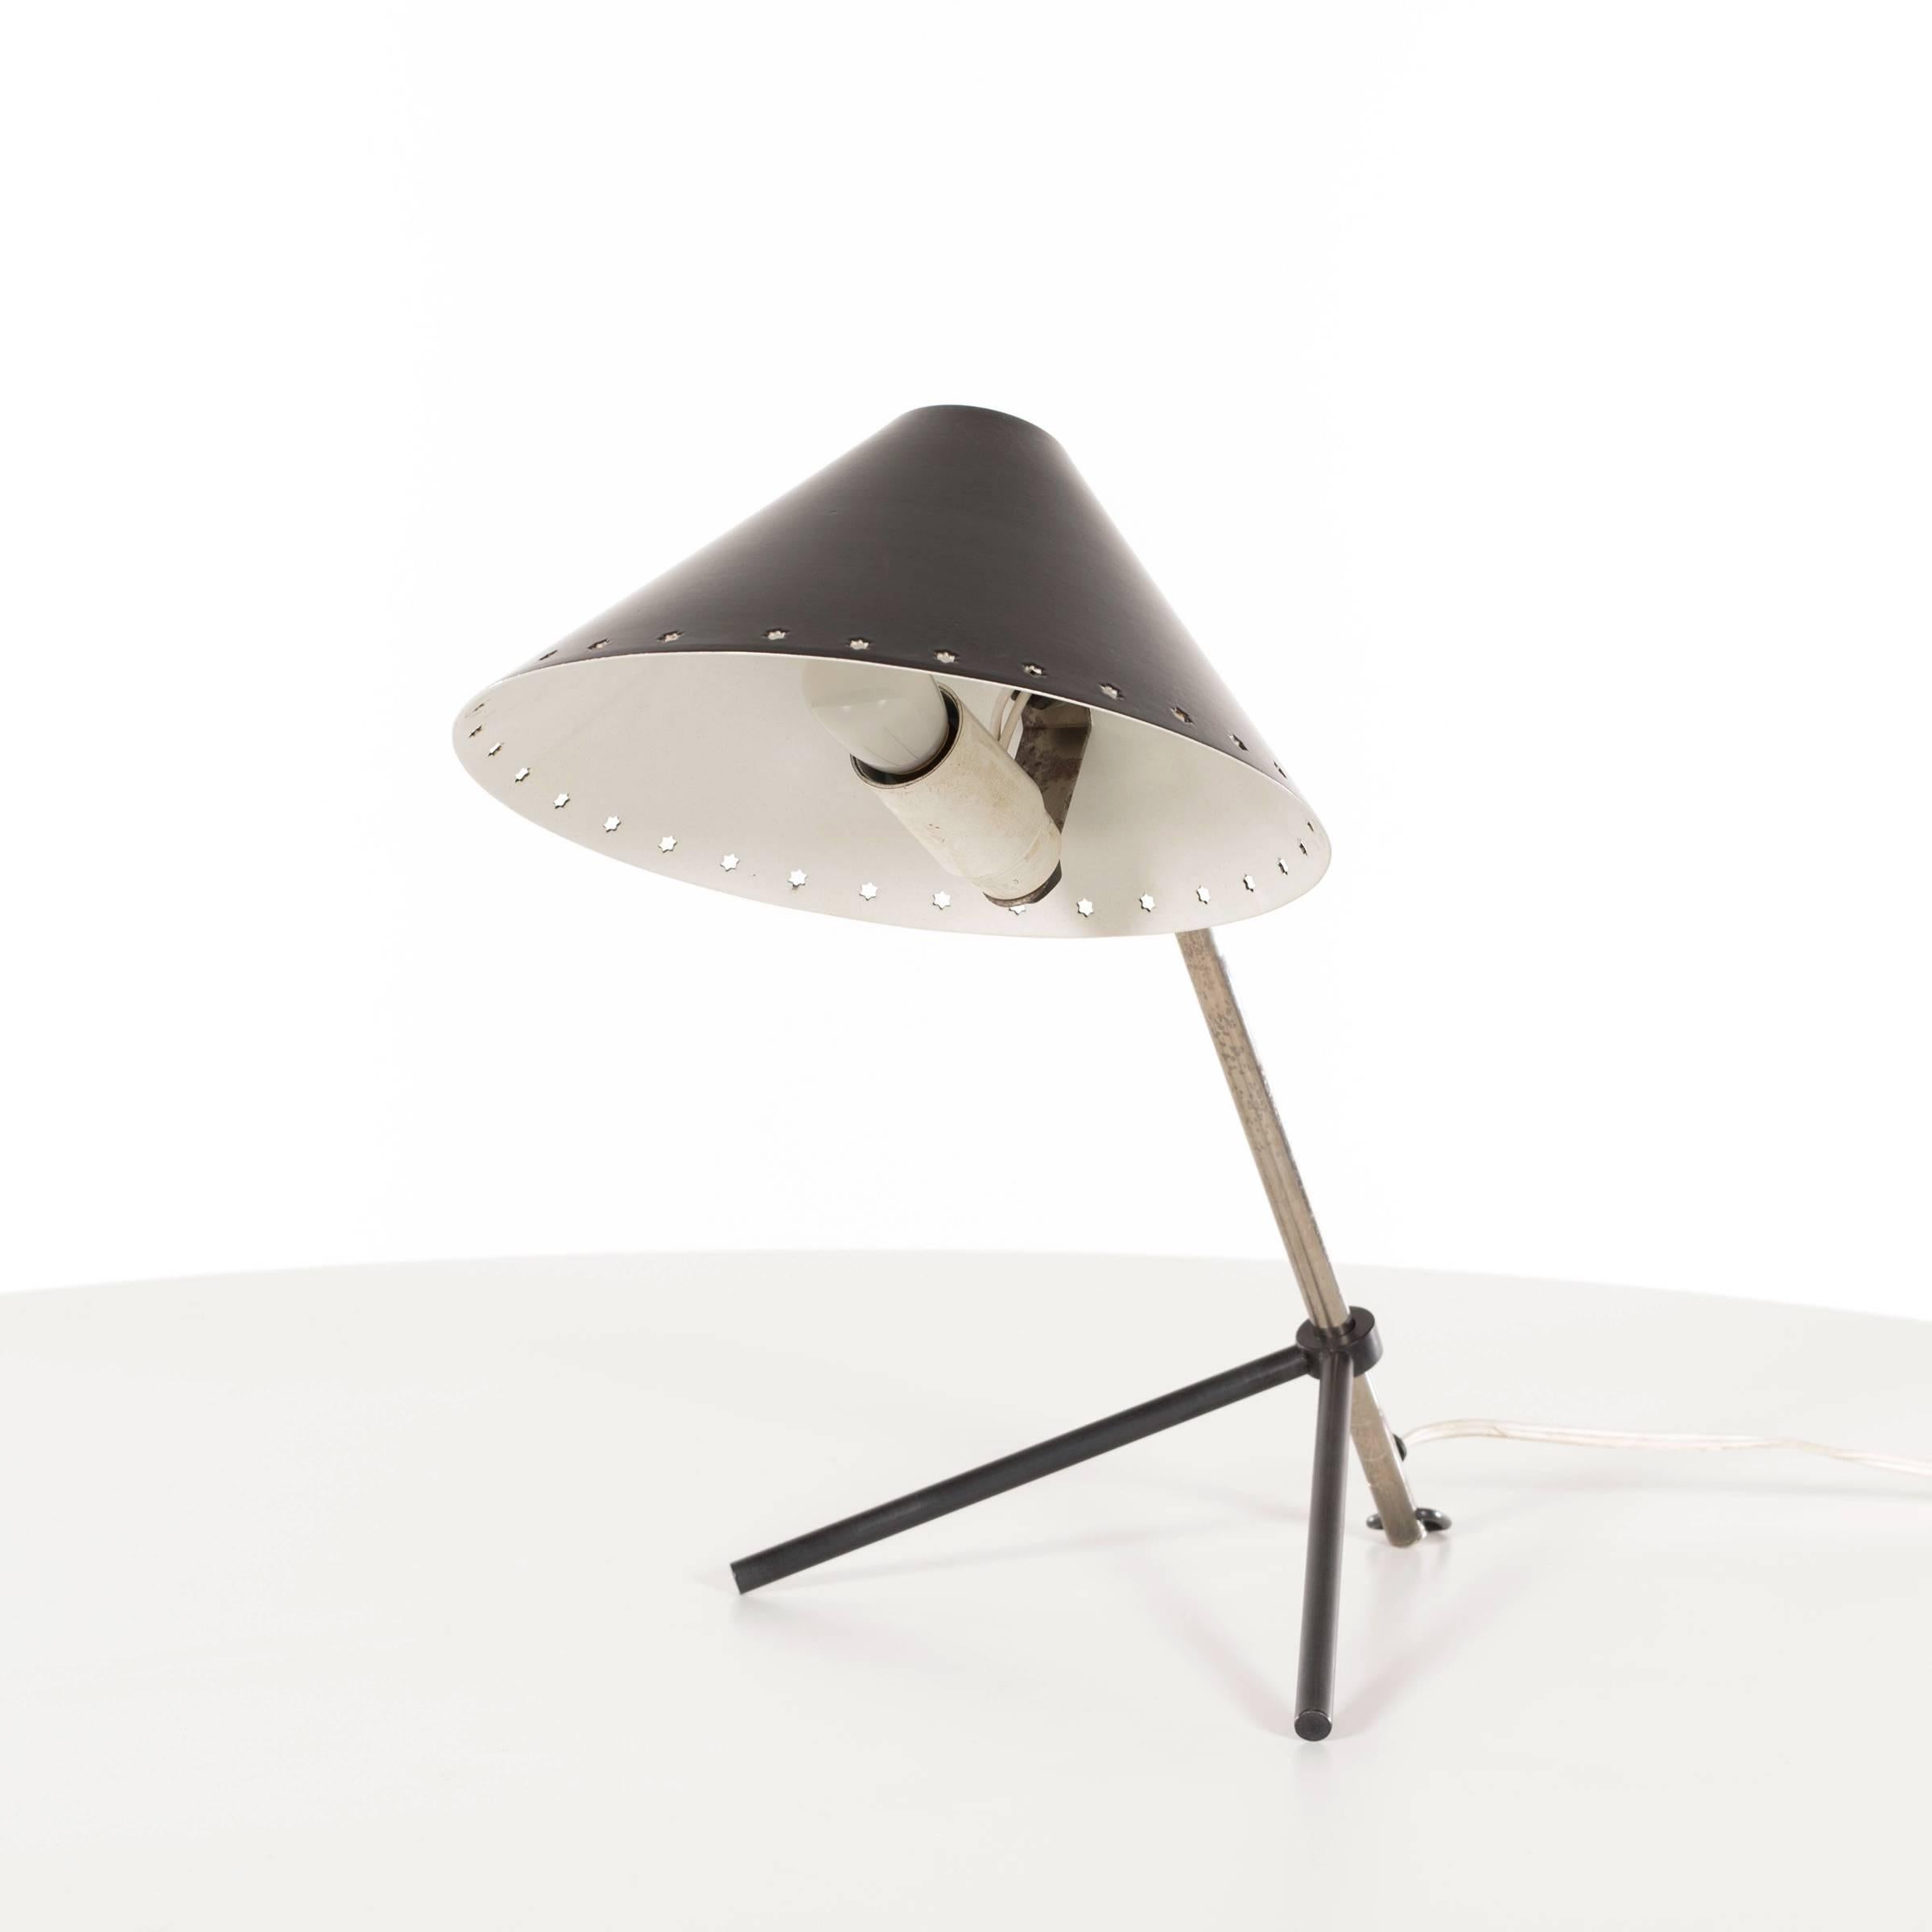 Elegant and stylish table or wall lamp for Dutch lighting company Hala. Tripod base adjustable in height and angle. Minimalistic, beautiful and well thought out designed lamp in very good original condition. 